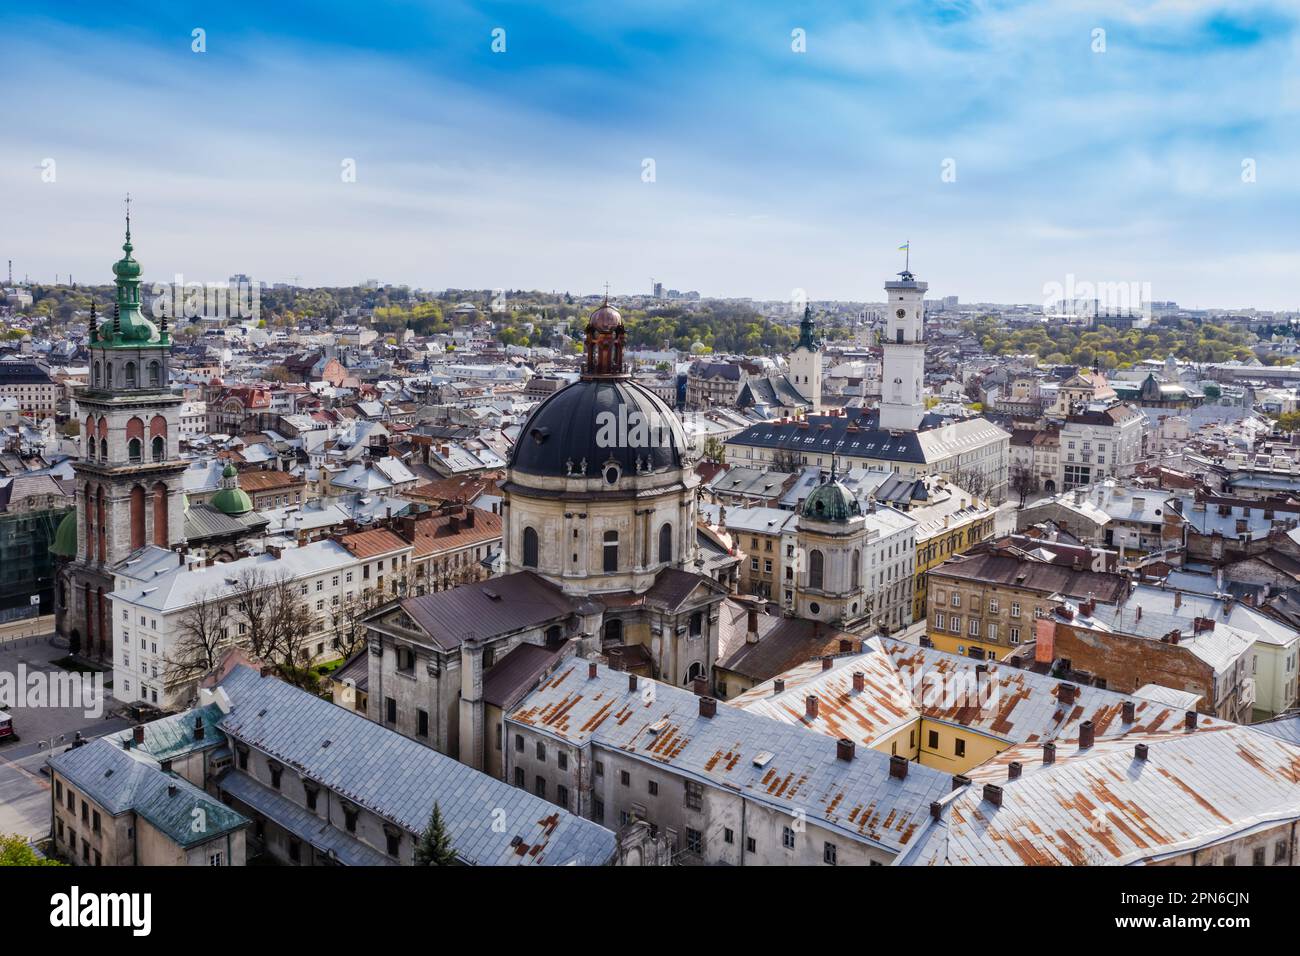 Aerial view of a stunning European cityscape featuring a prominent domed structure and several tall spires Stock Photo